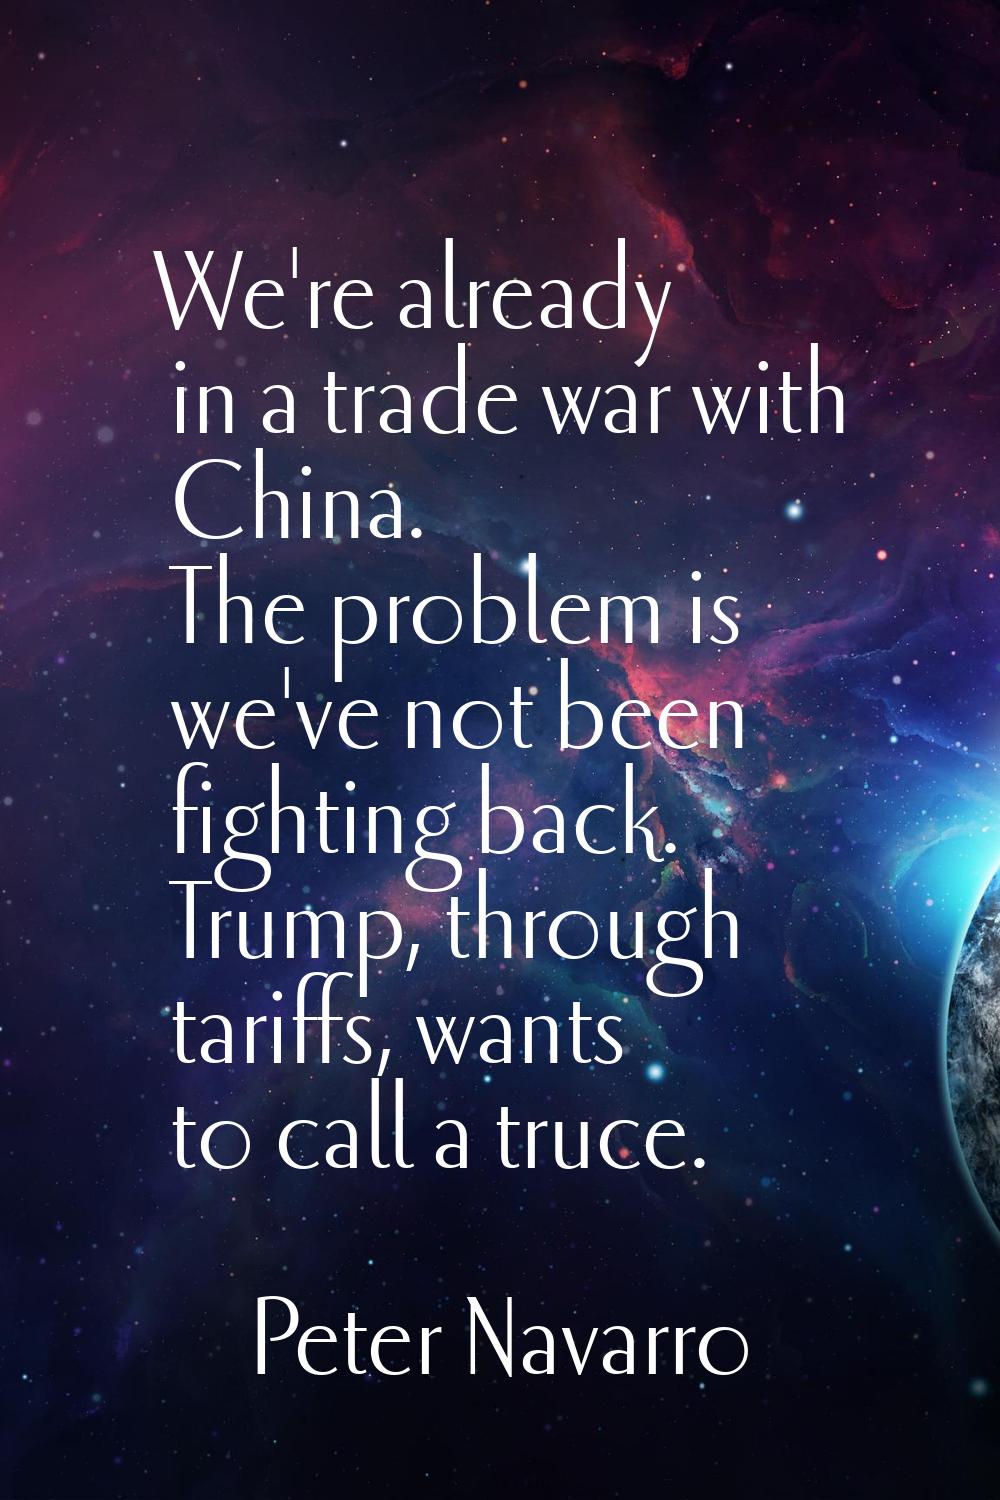 We're already in a trade war with China. The problem is we've not been fighting back. Trump, throug